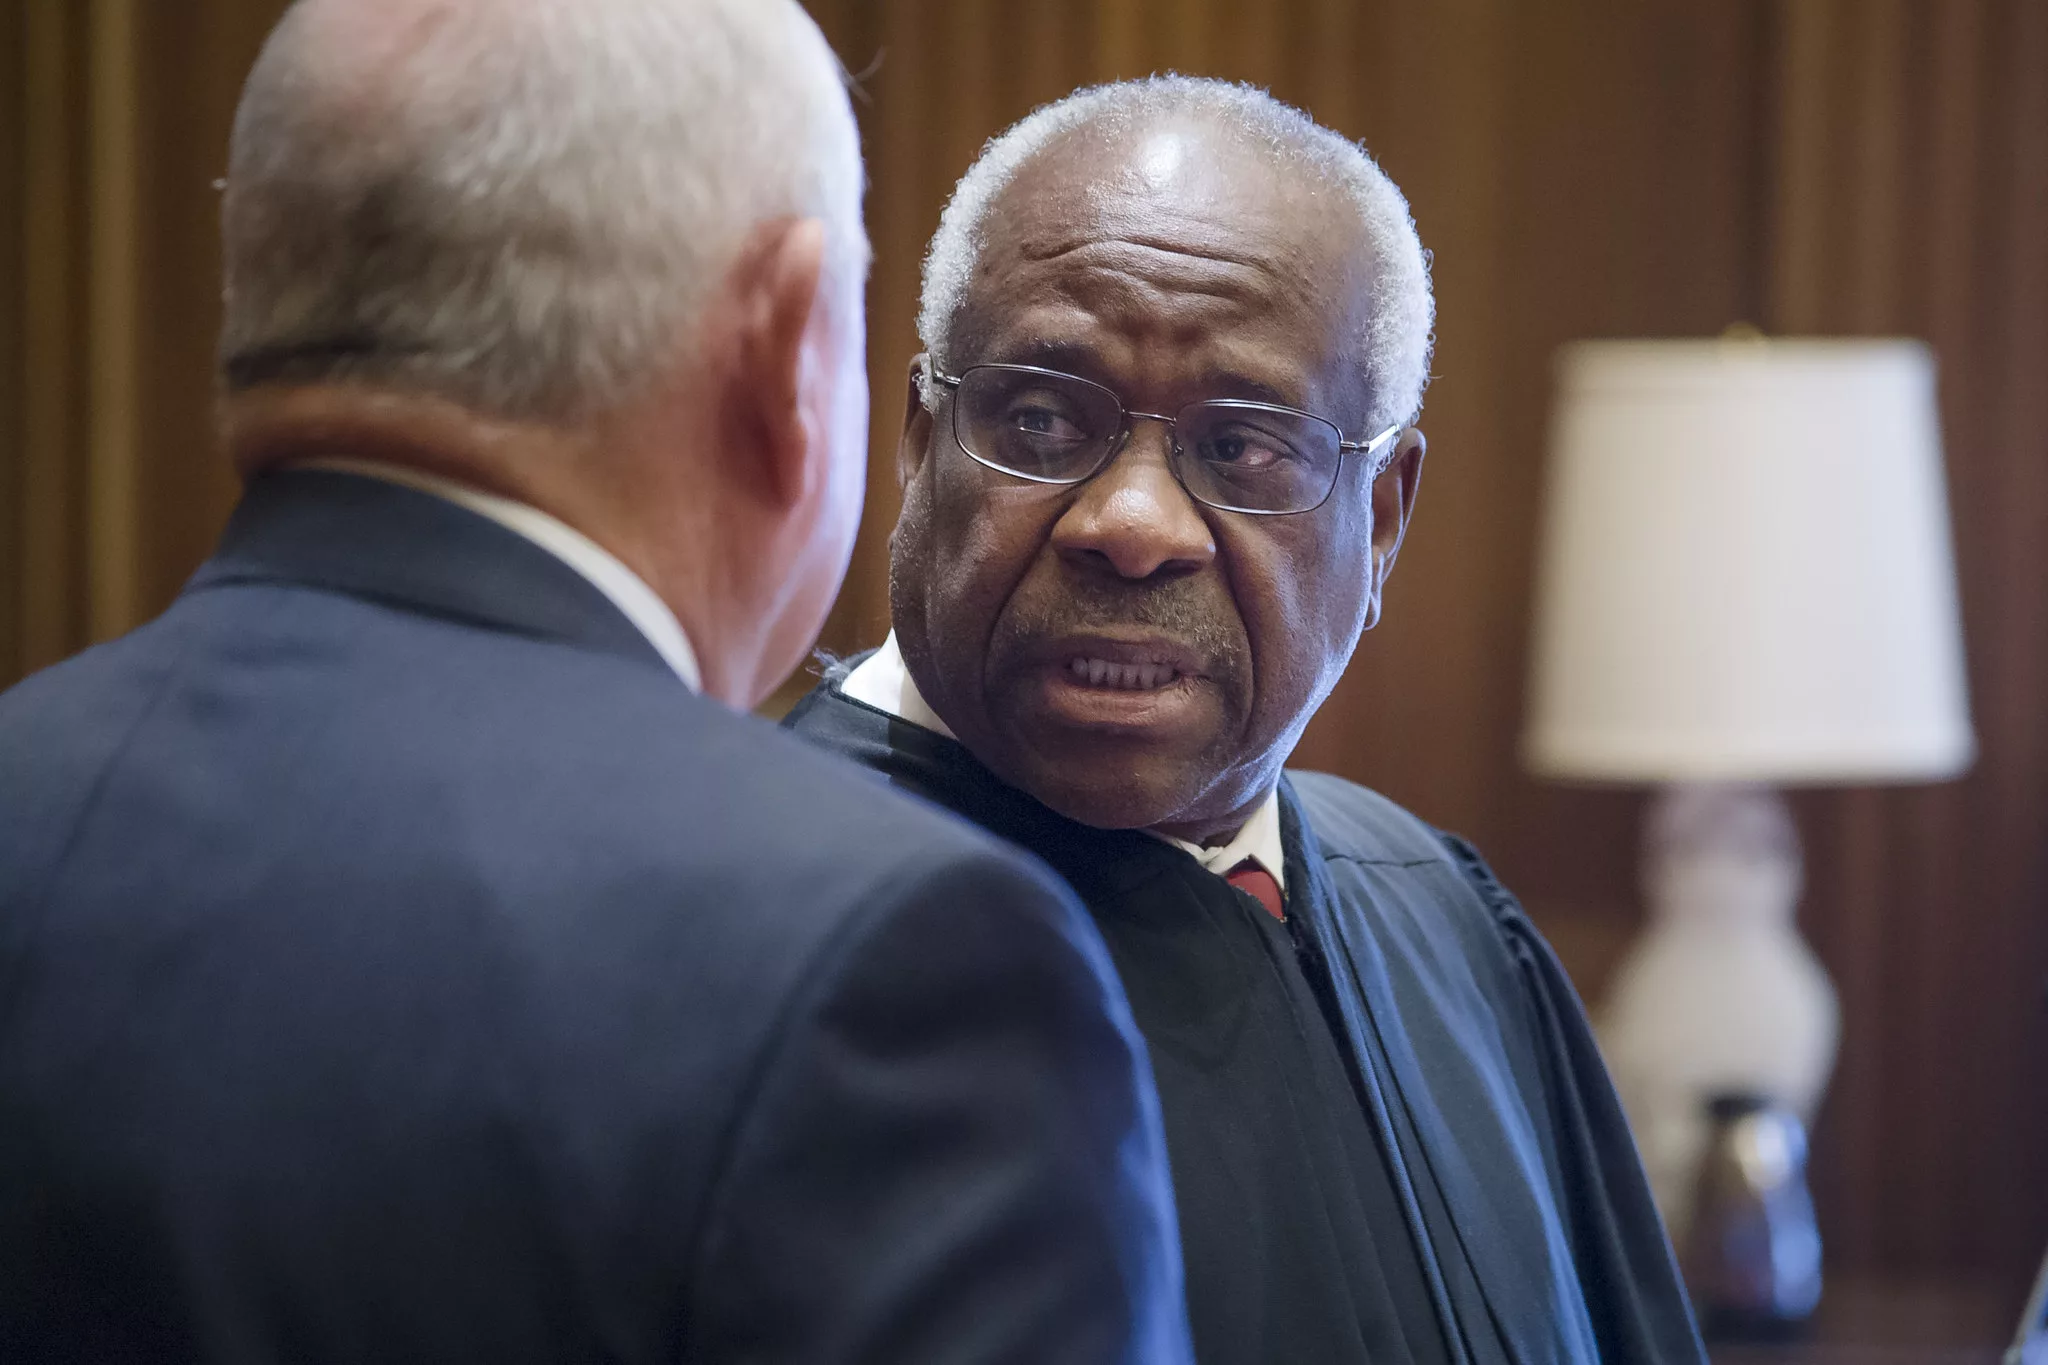 This photo shows a close-up of U.S. Supreme Court Justice Clarence Thomas. He is speaking to former U.S. Secretary of Agriculture Sonny Perdue, whose back is turned to the camera.